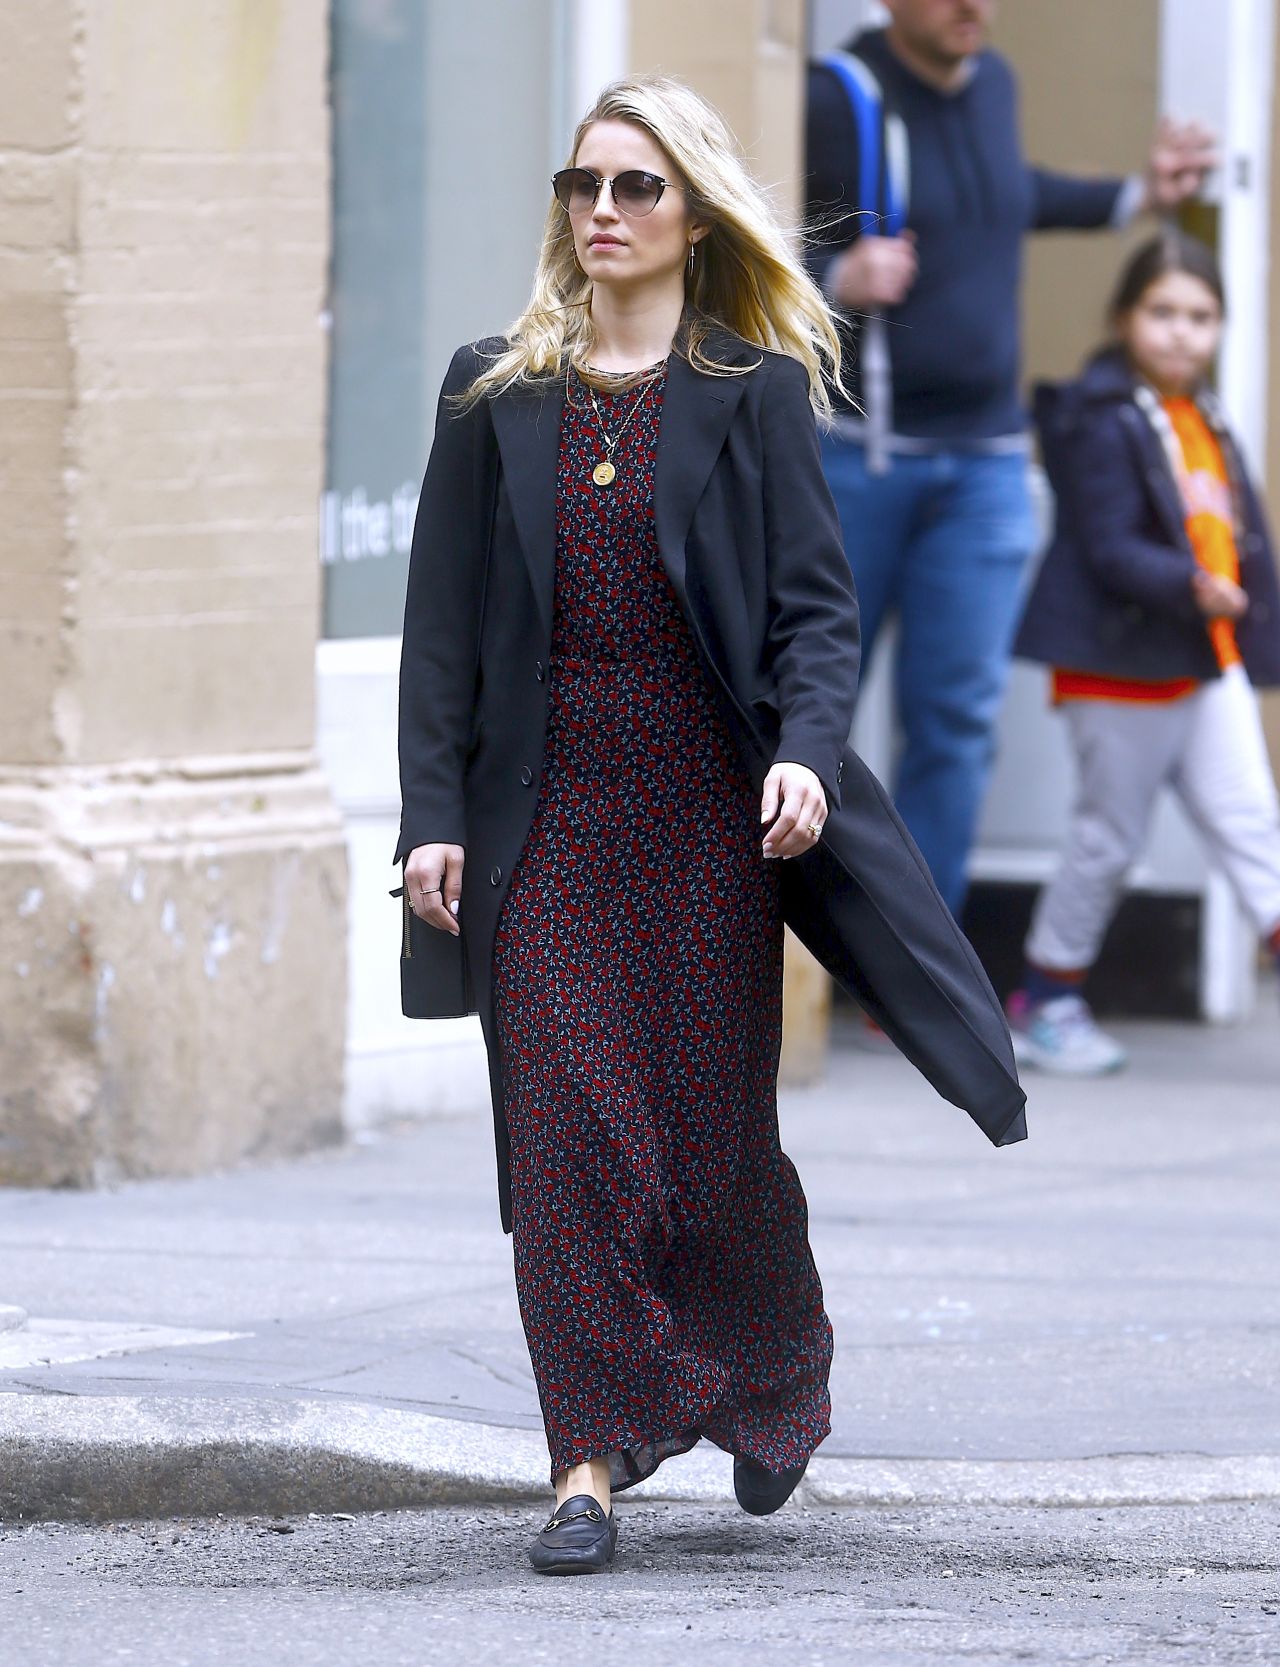 dianna-agron-out-in-soho-in-new-york-city-05-06-2018-5.jpg